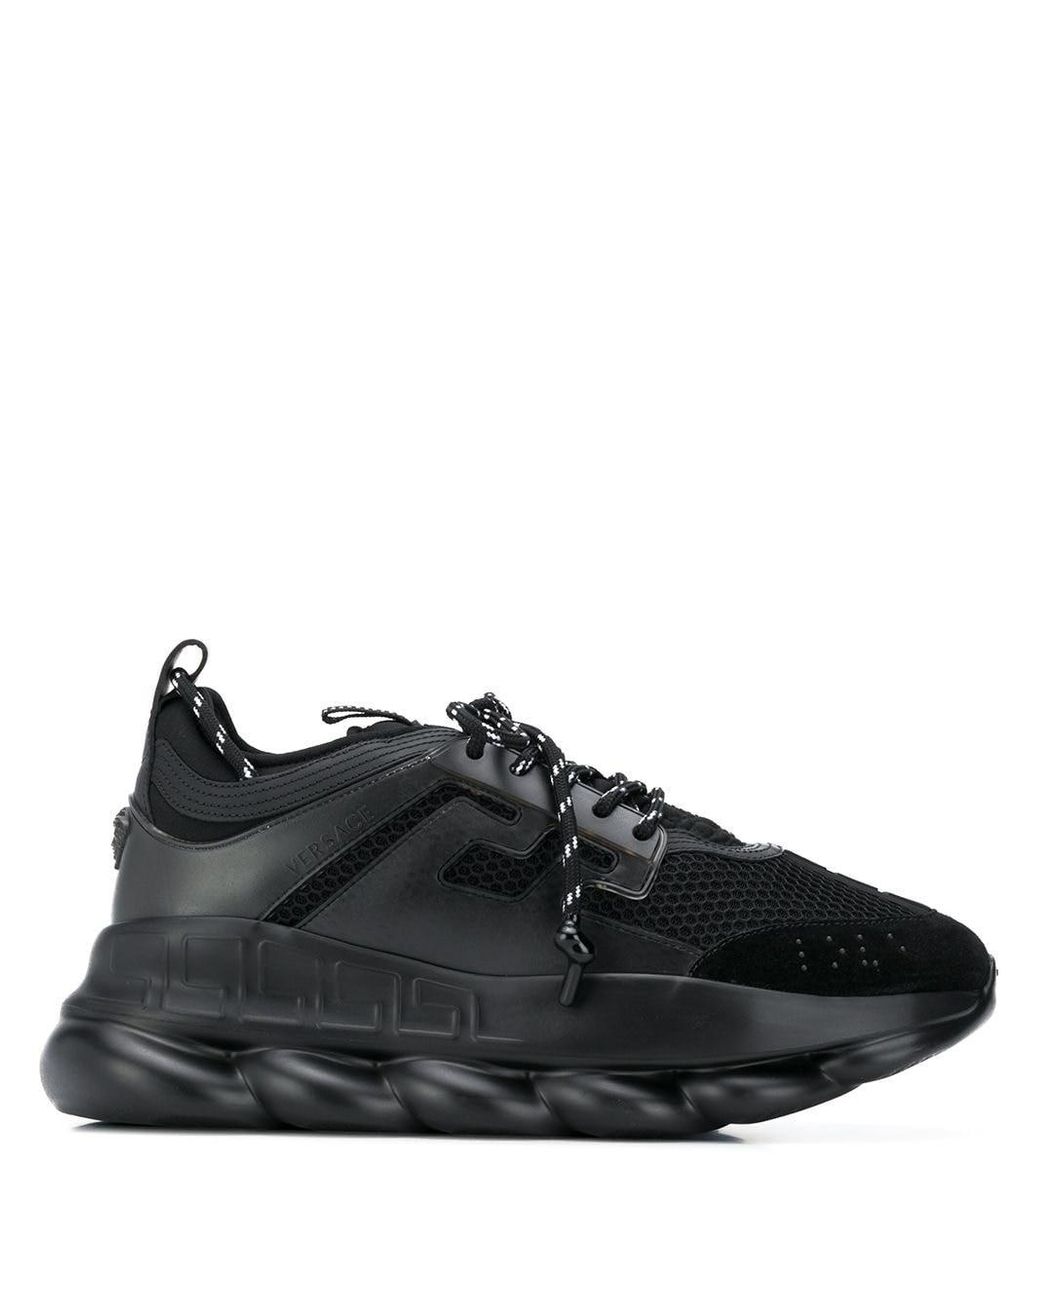 Versace Leather 'chain Reaction' Sneakers in Black for Men - Lyst